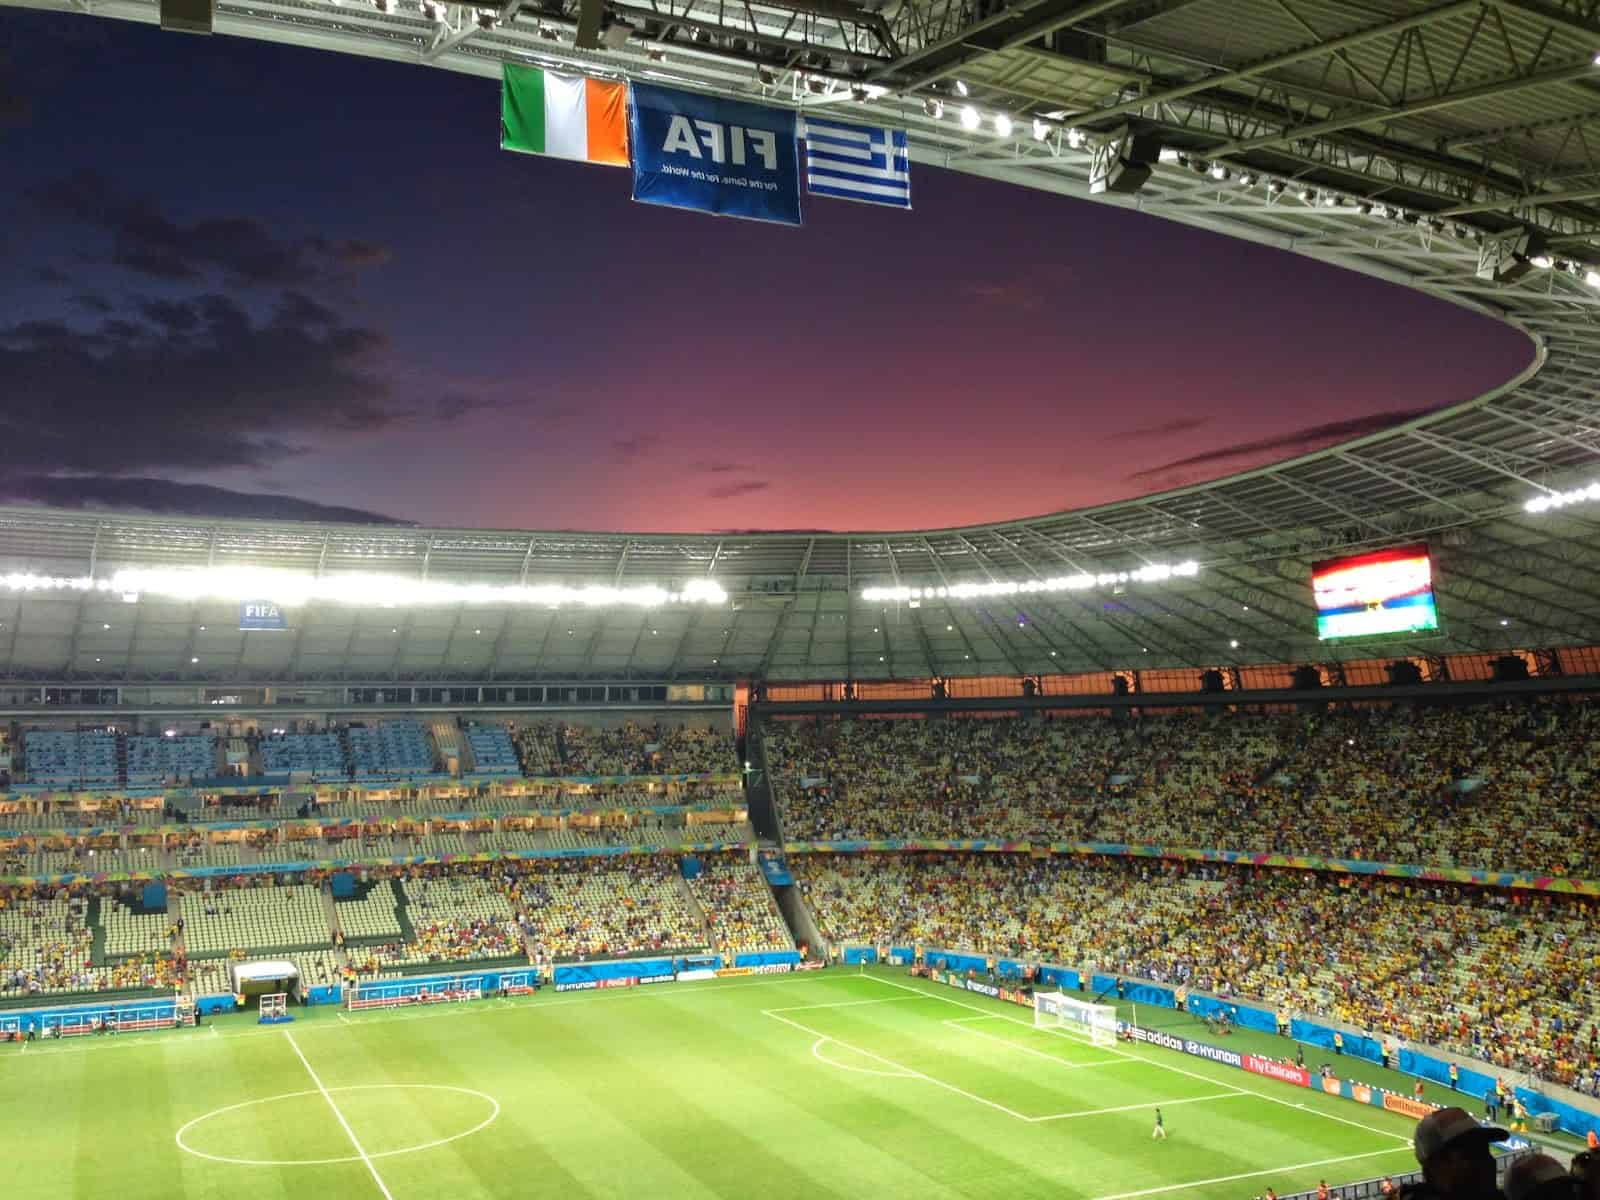 A beautiful sky at half time at Arena Castelão in Fortaleza, Brazil